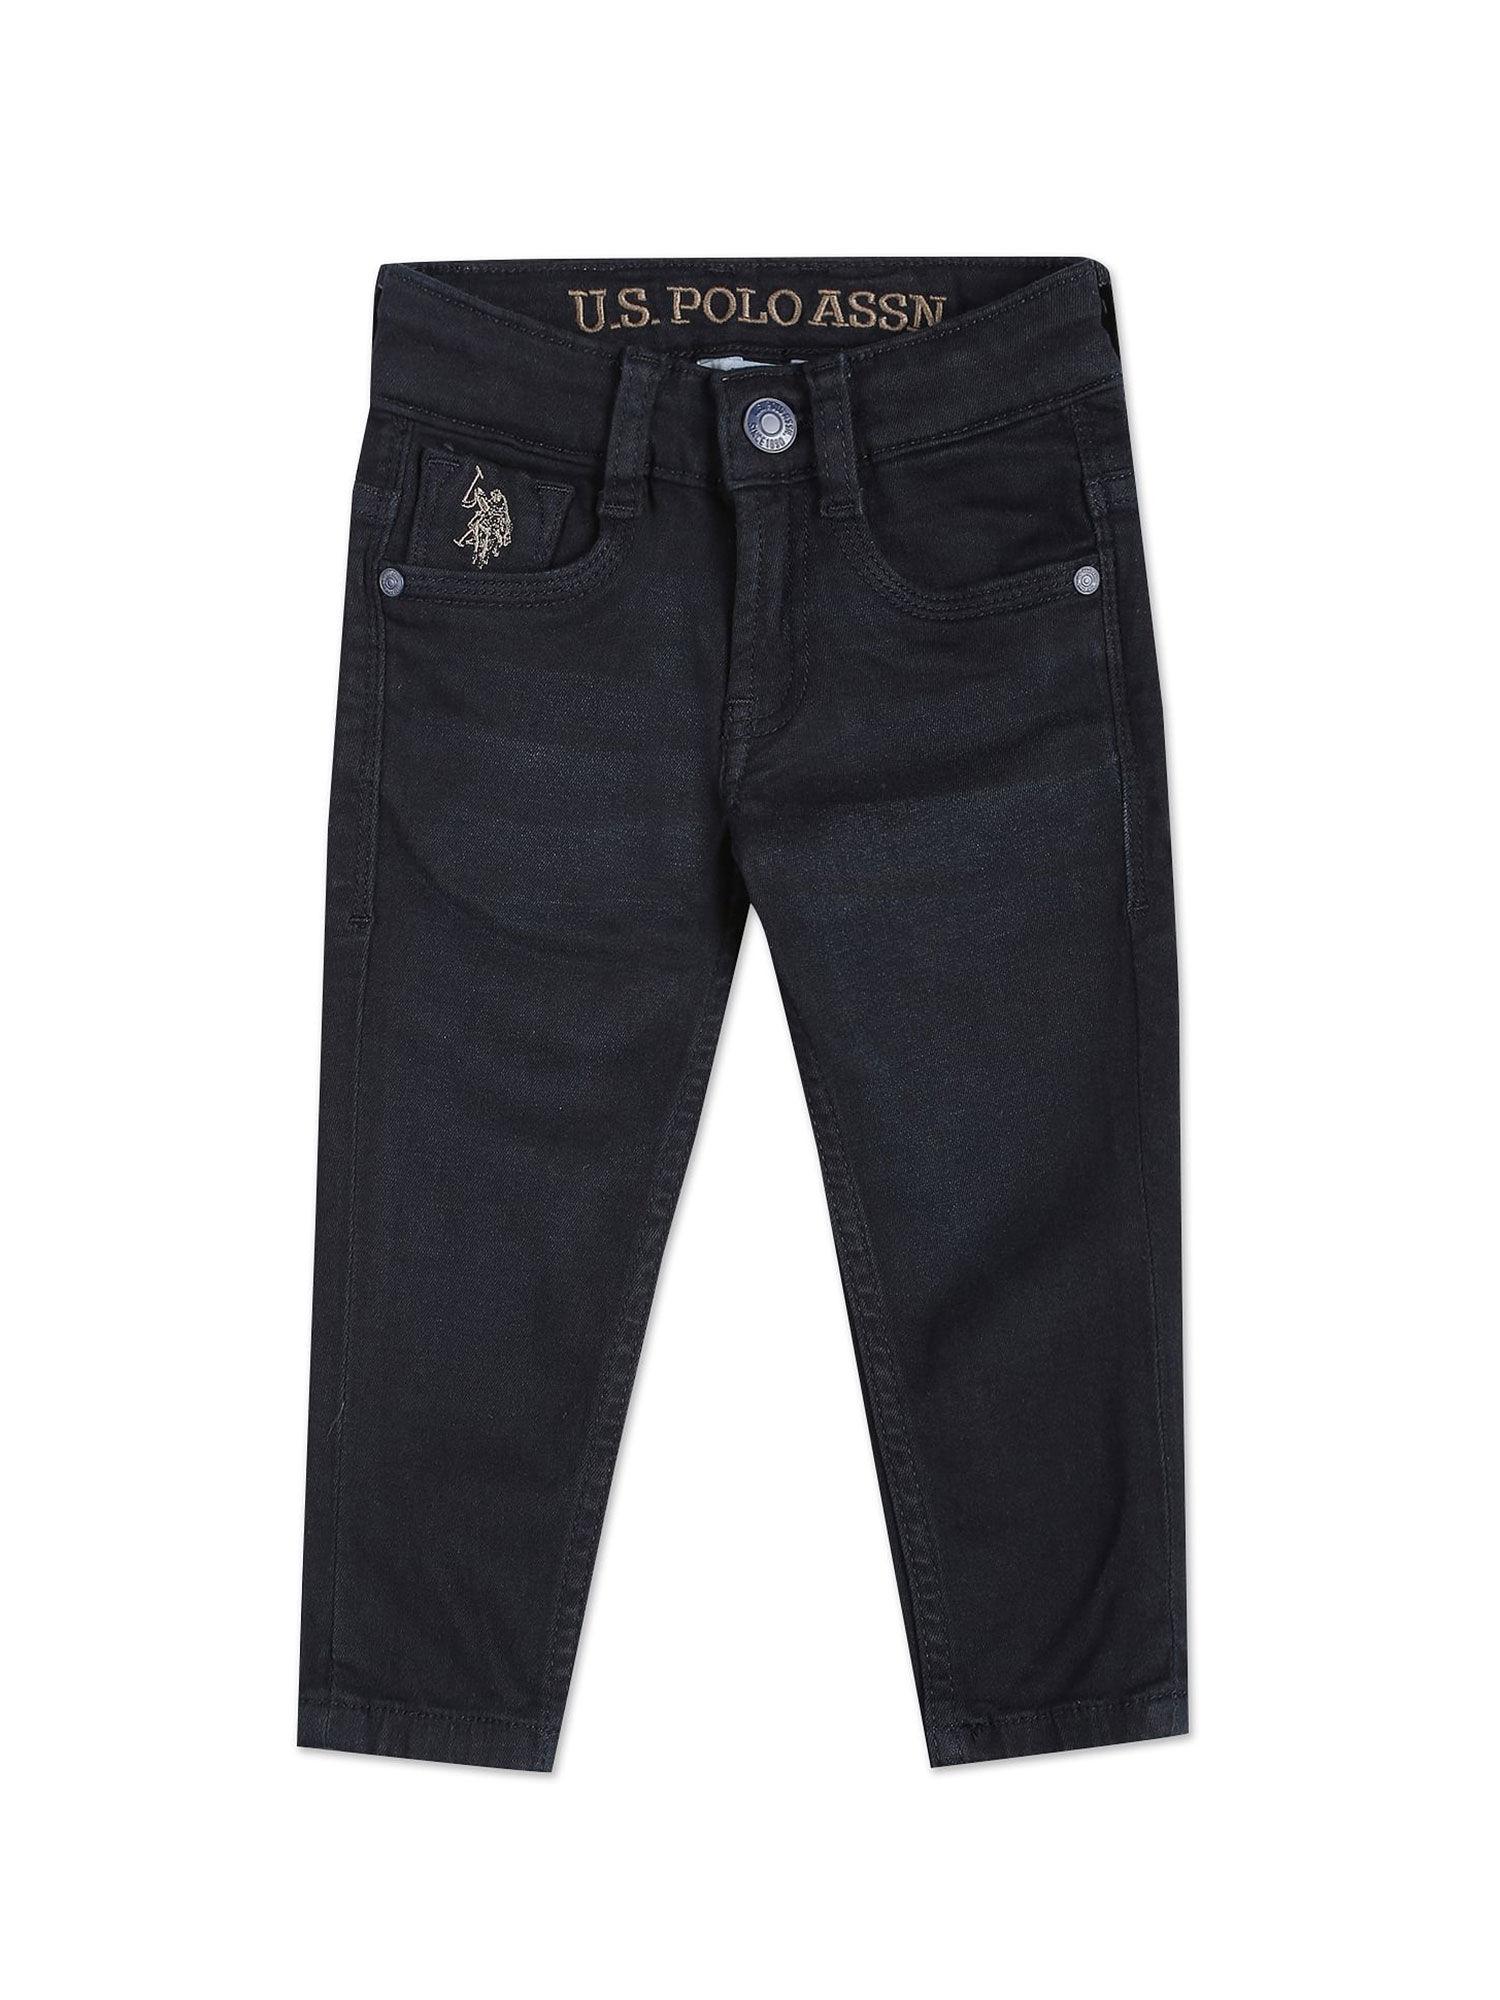 skinny-fit-authentic-1890-jeans-black